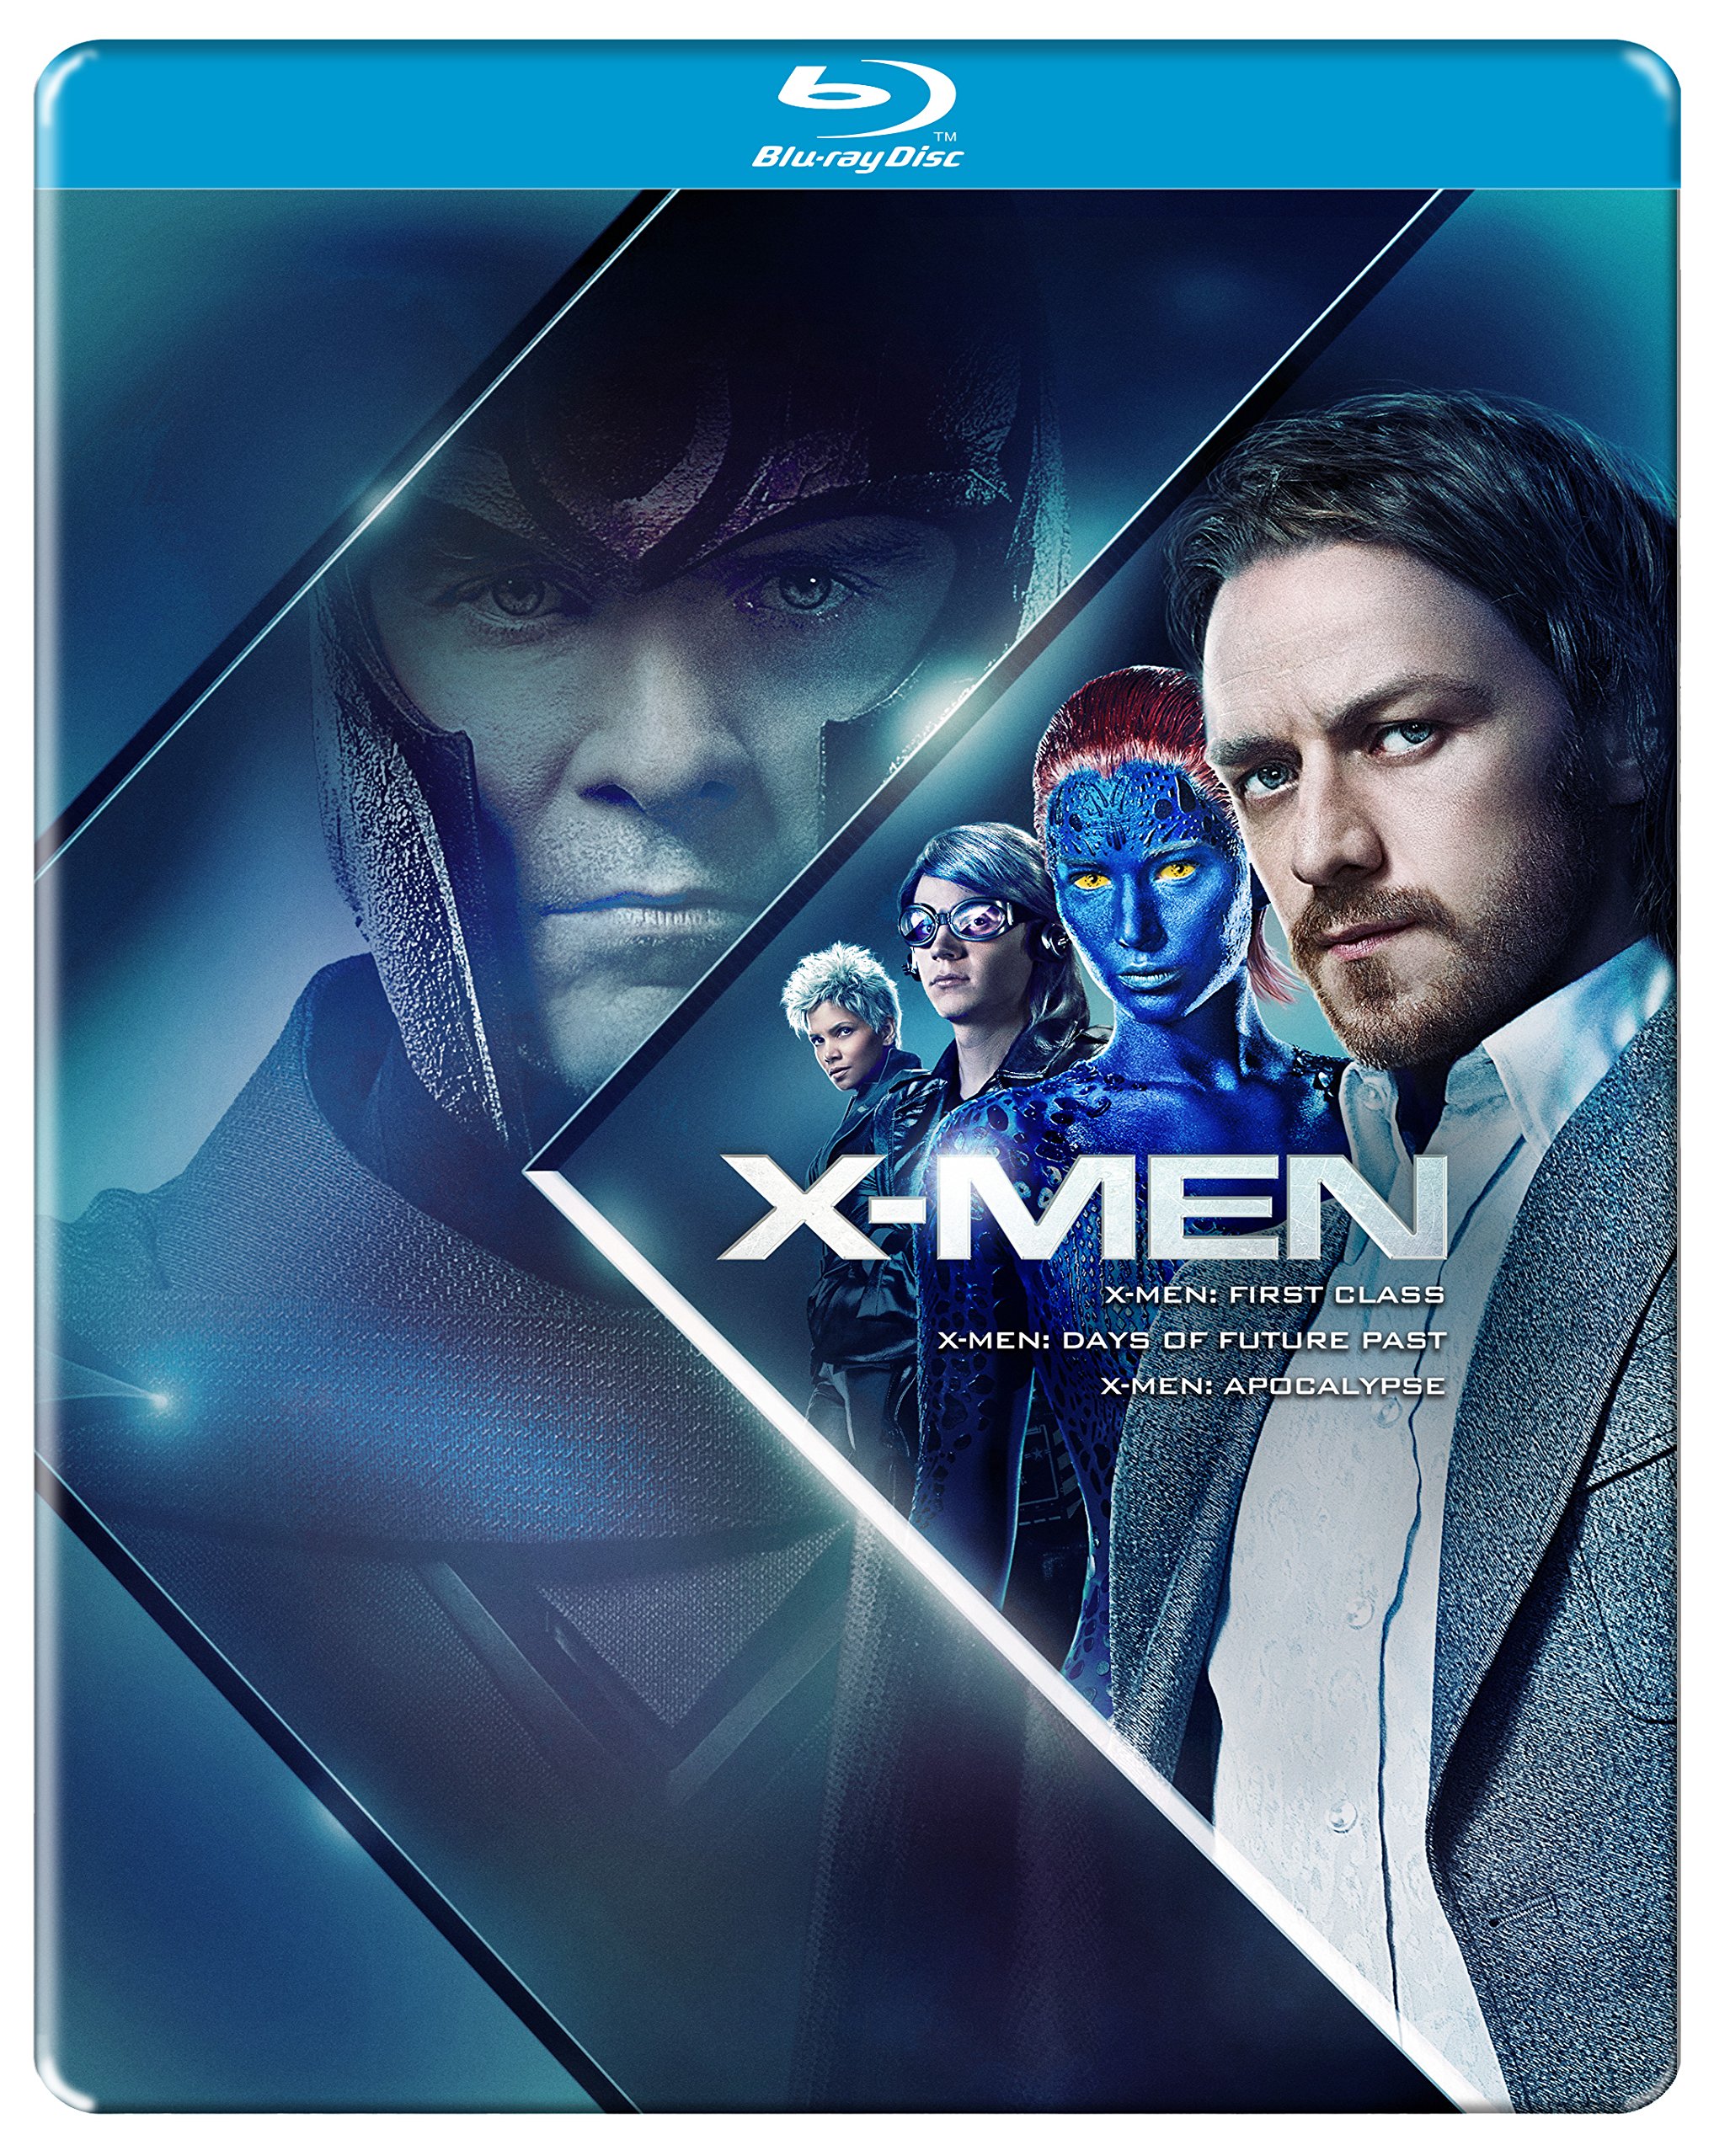 x-men-prequel-3-movies-collection-first-class-days-of-future-past-apocalypse-steelbook-3-disc-box-set